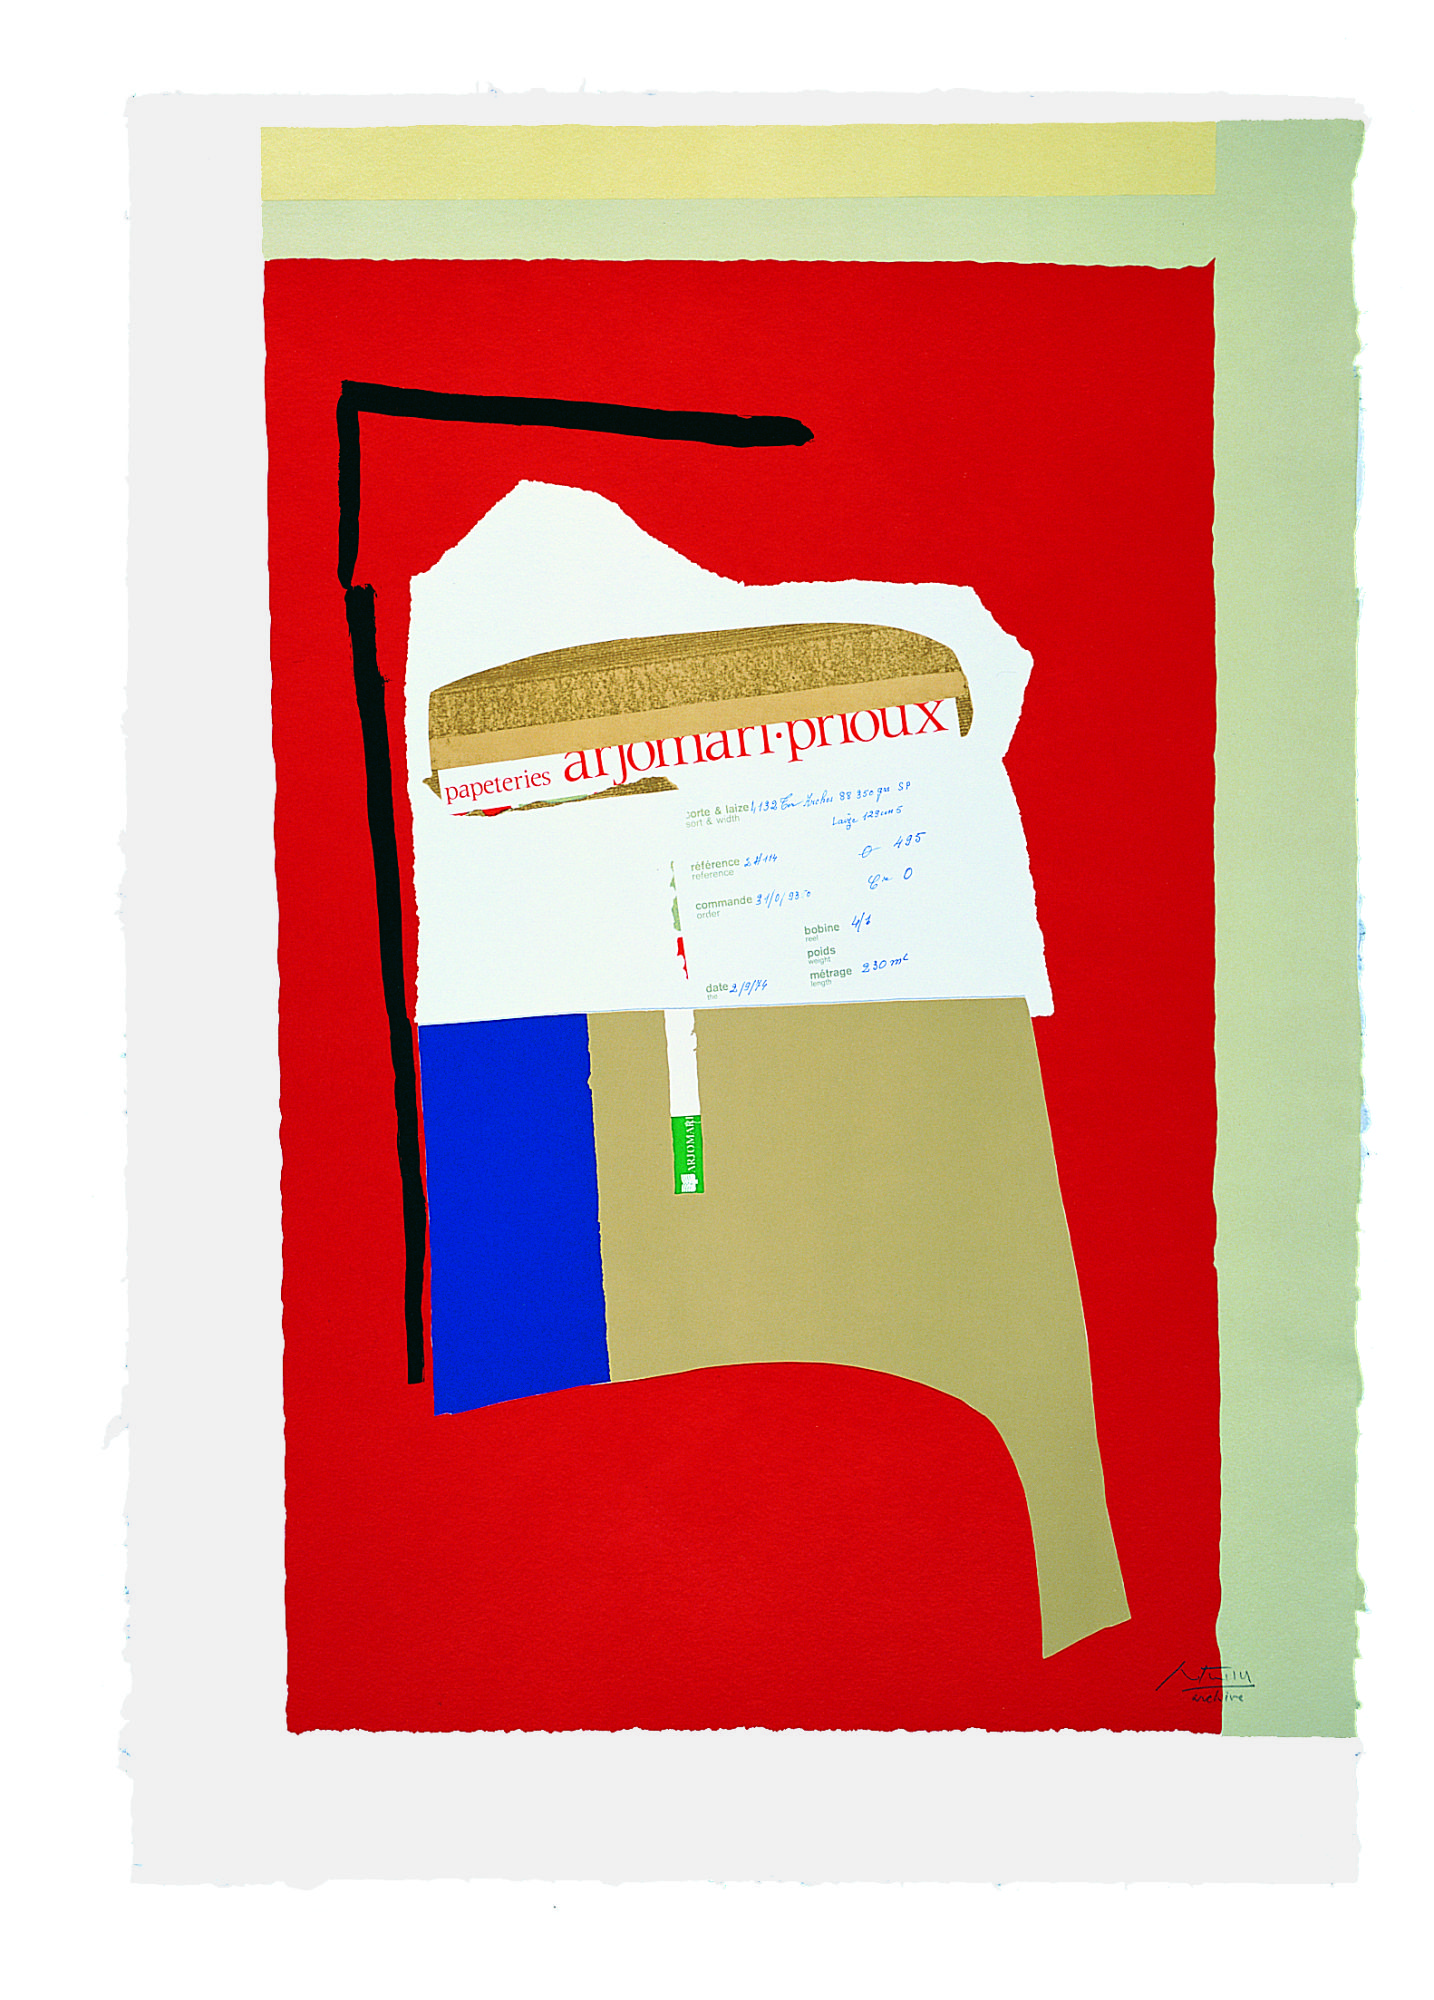 America-La France Variations I, 1984. Lithograph and collage, 46 ½ x 32 1/8 inches (118.1 x 81.6 cm)